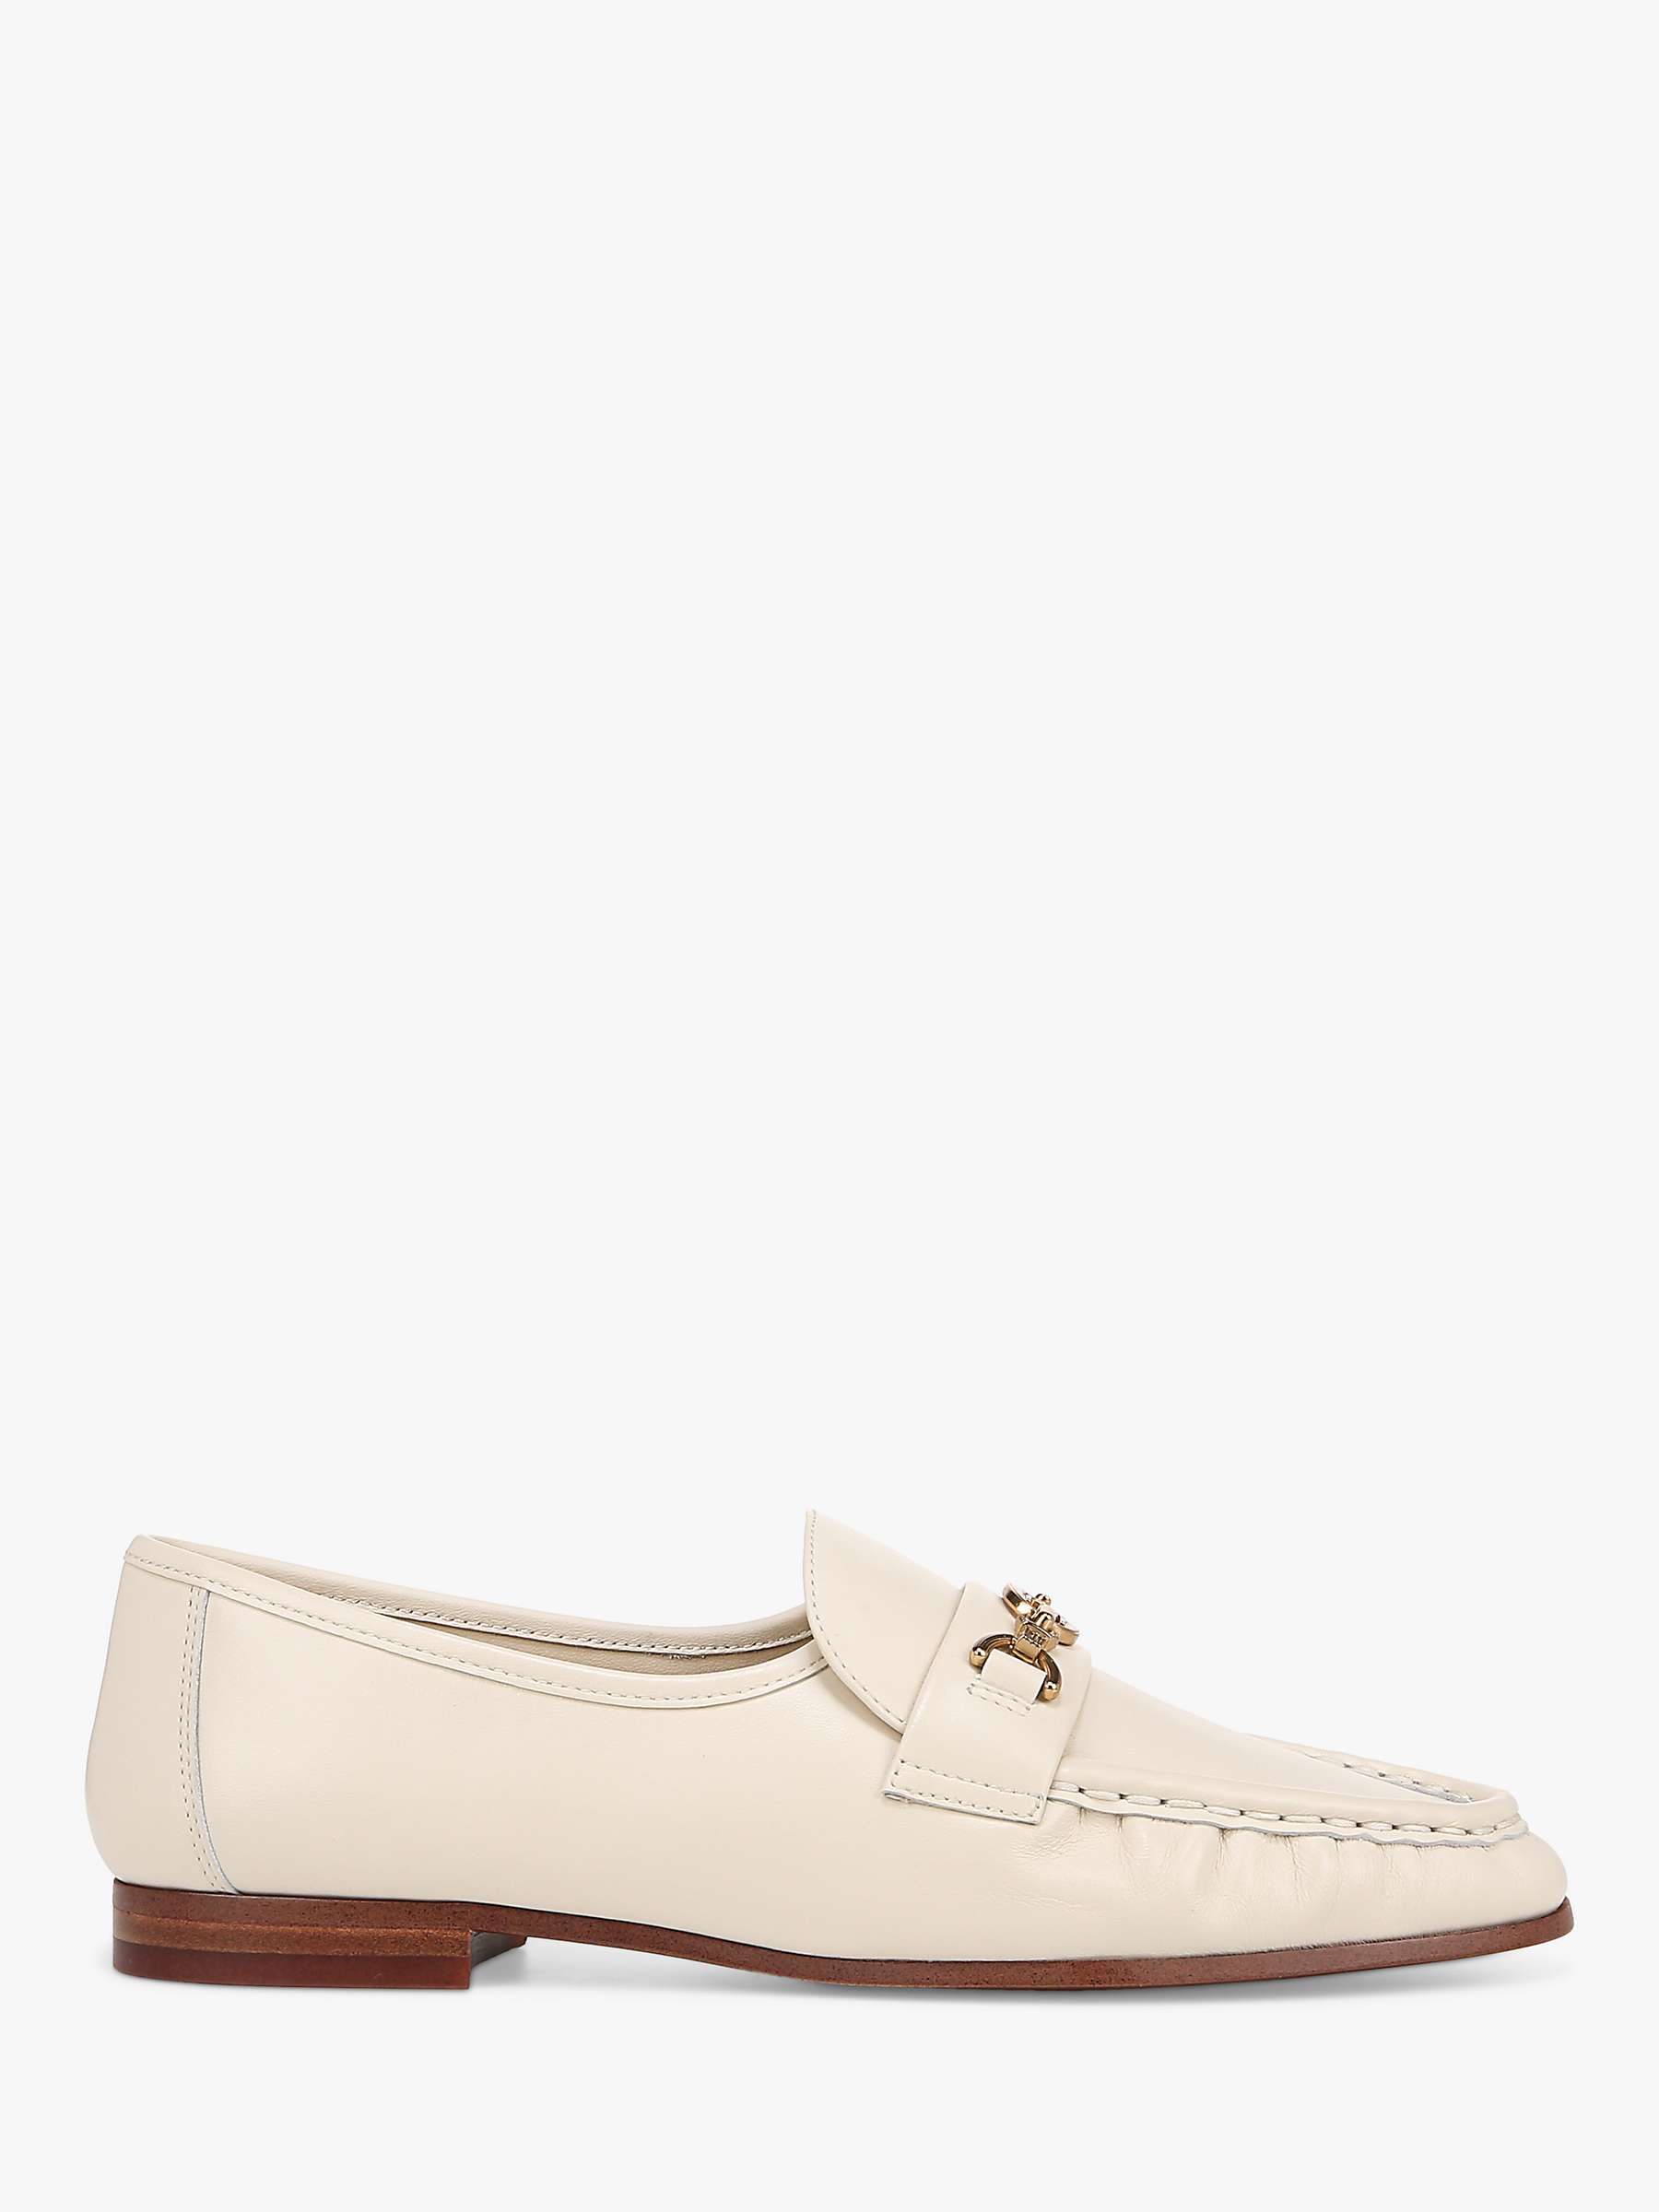 Buy Sam Edelman Lucca Leather Loafers Online at johnlewis.com